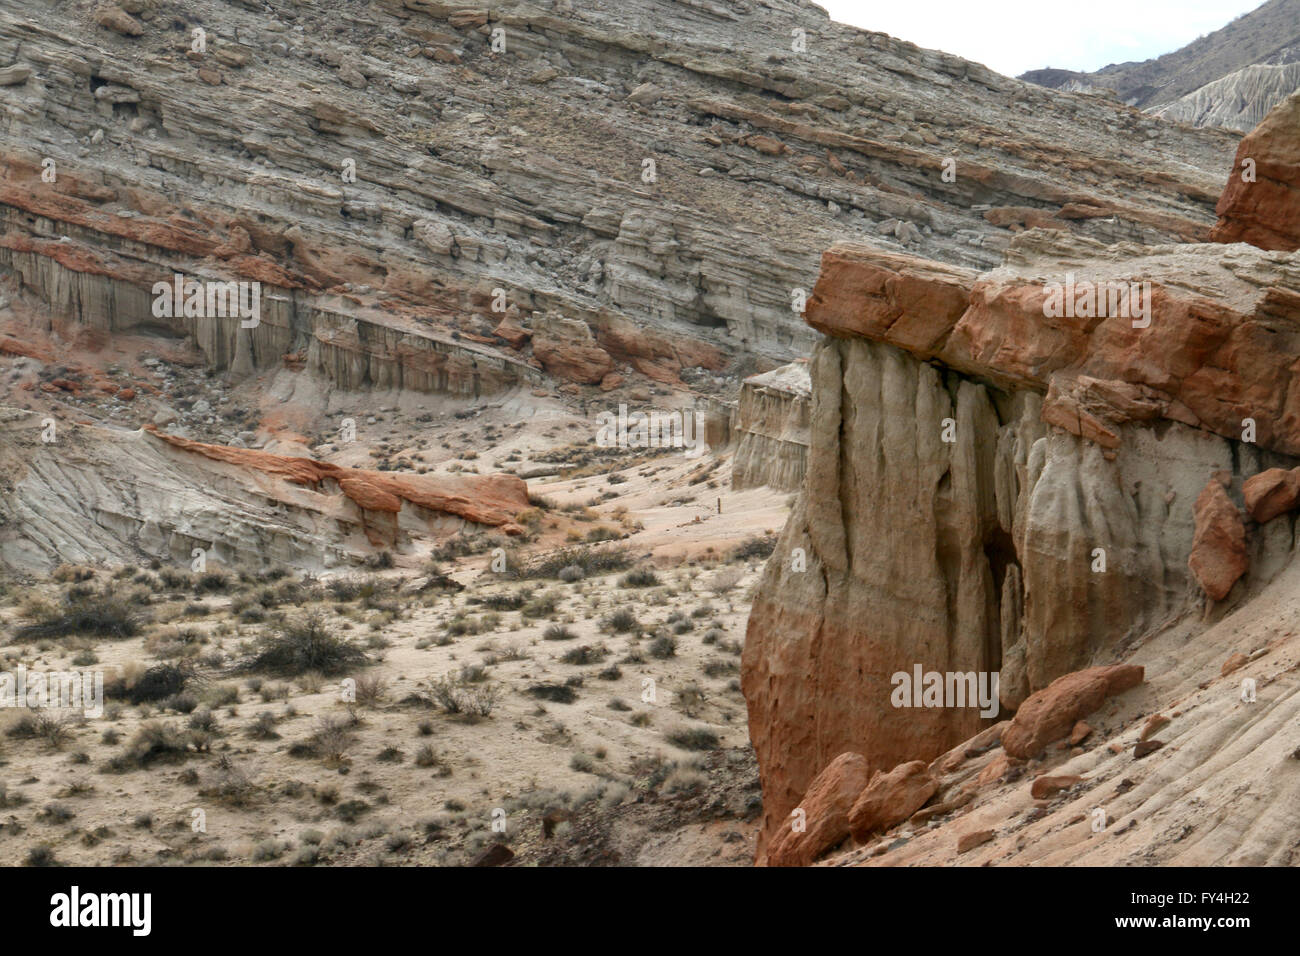 Red Rock Canyon State Park California desert cliffs, buttes rock formations Stock Photo